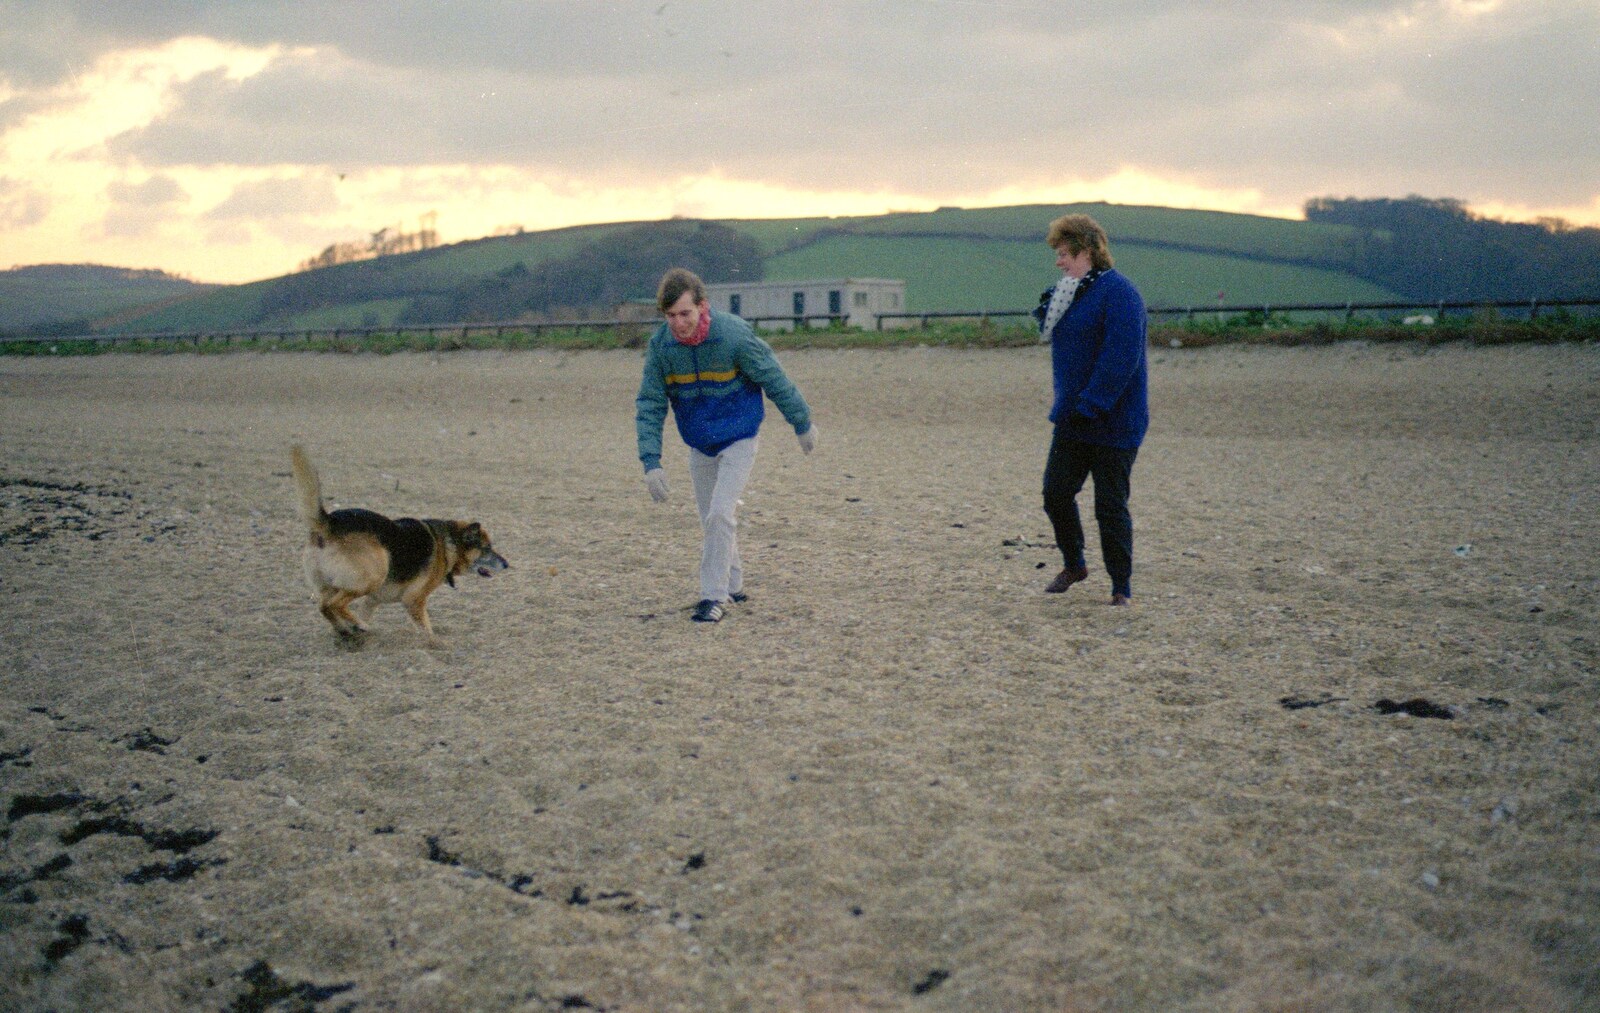 Marty, Dave and Kate from Uni: Wembury and Slapton, Devon - 18th March 1989